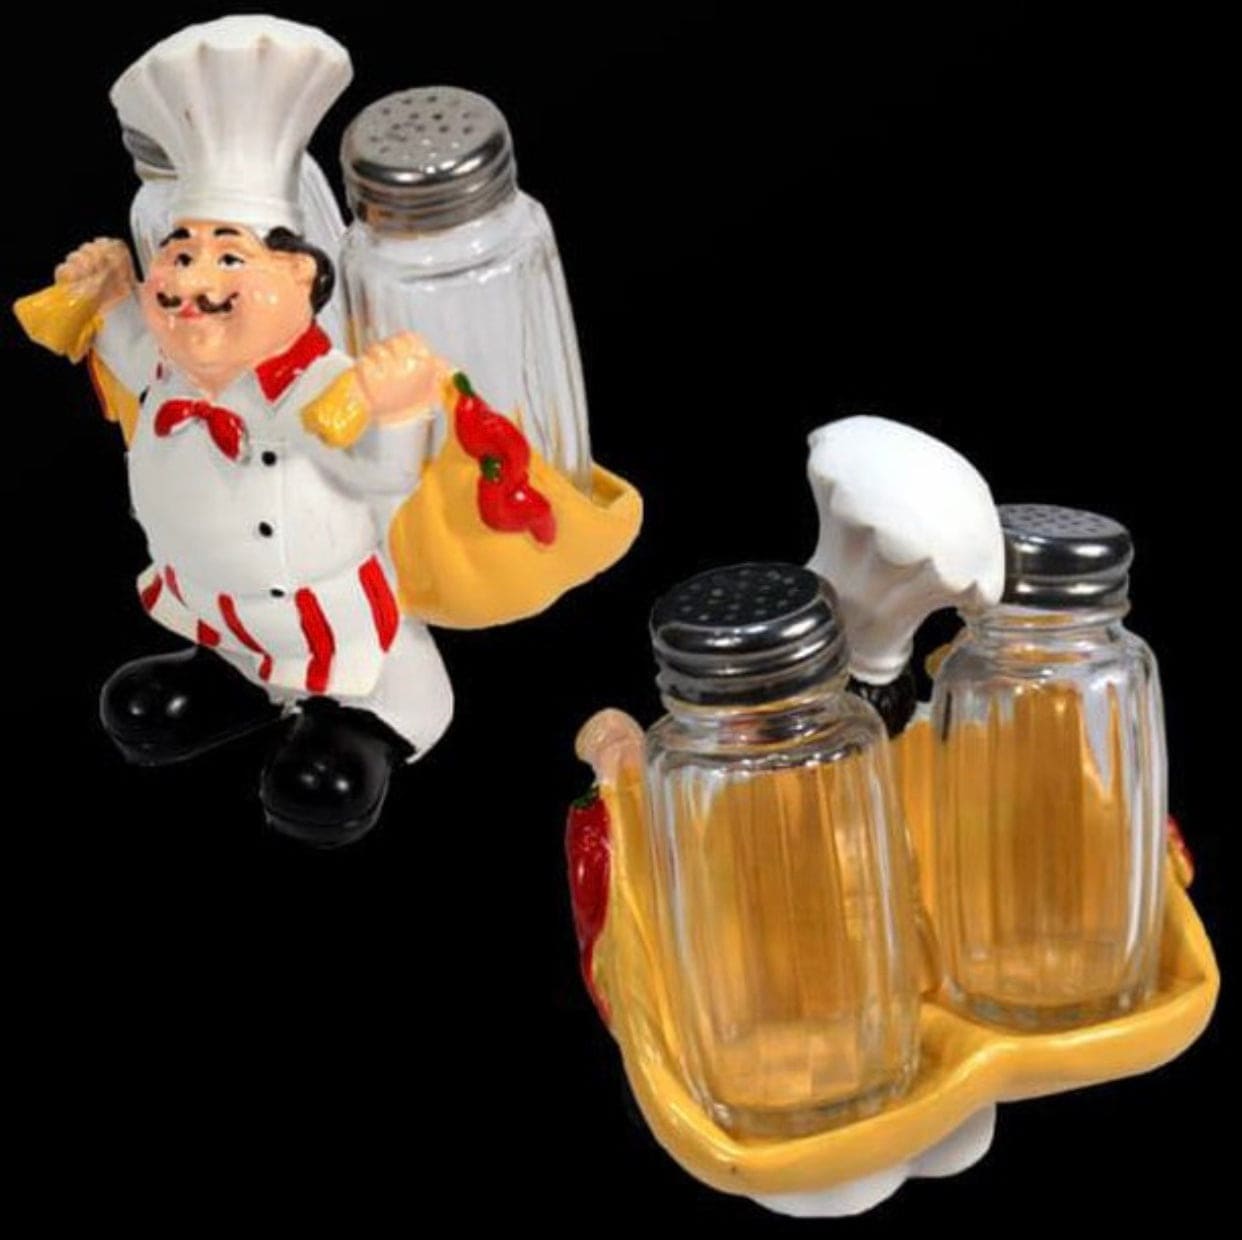 Cute Chef Statue Salt And Pepper Bottle Holder, Kitchen Cute Chef Ornament, Miniatures Mentalities Kitchen Decoration Resin Crafts